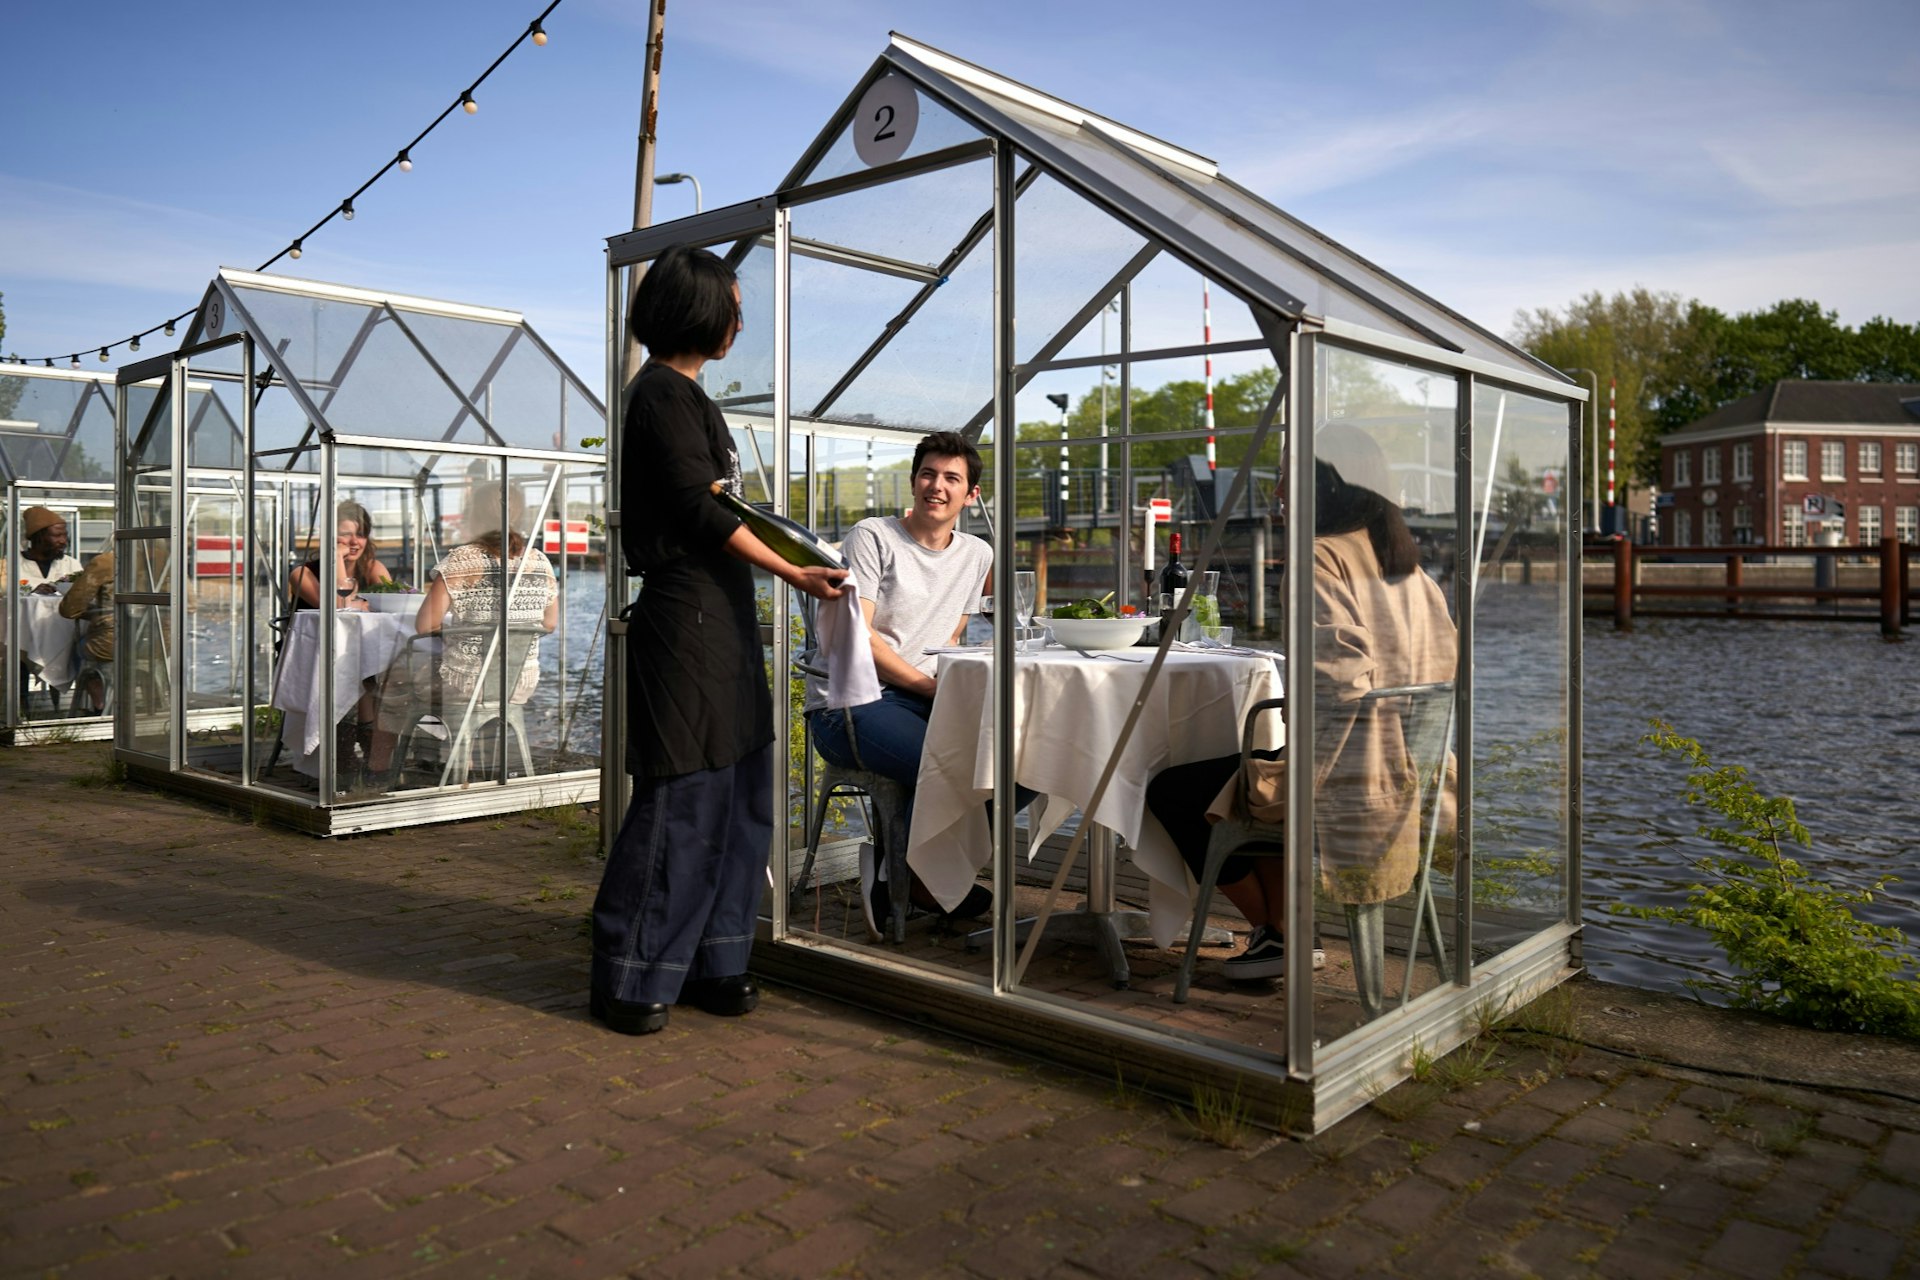 Guests at a restaurant seated inside enclosed glass structures